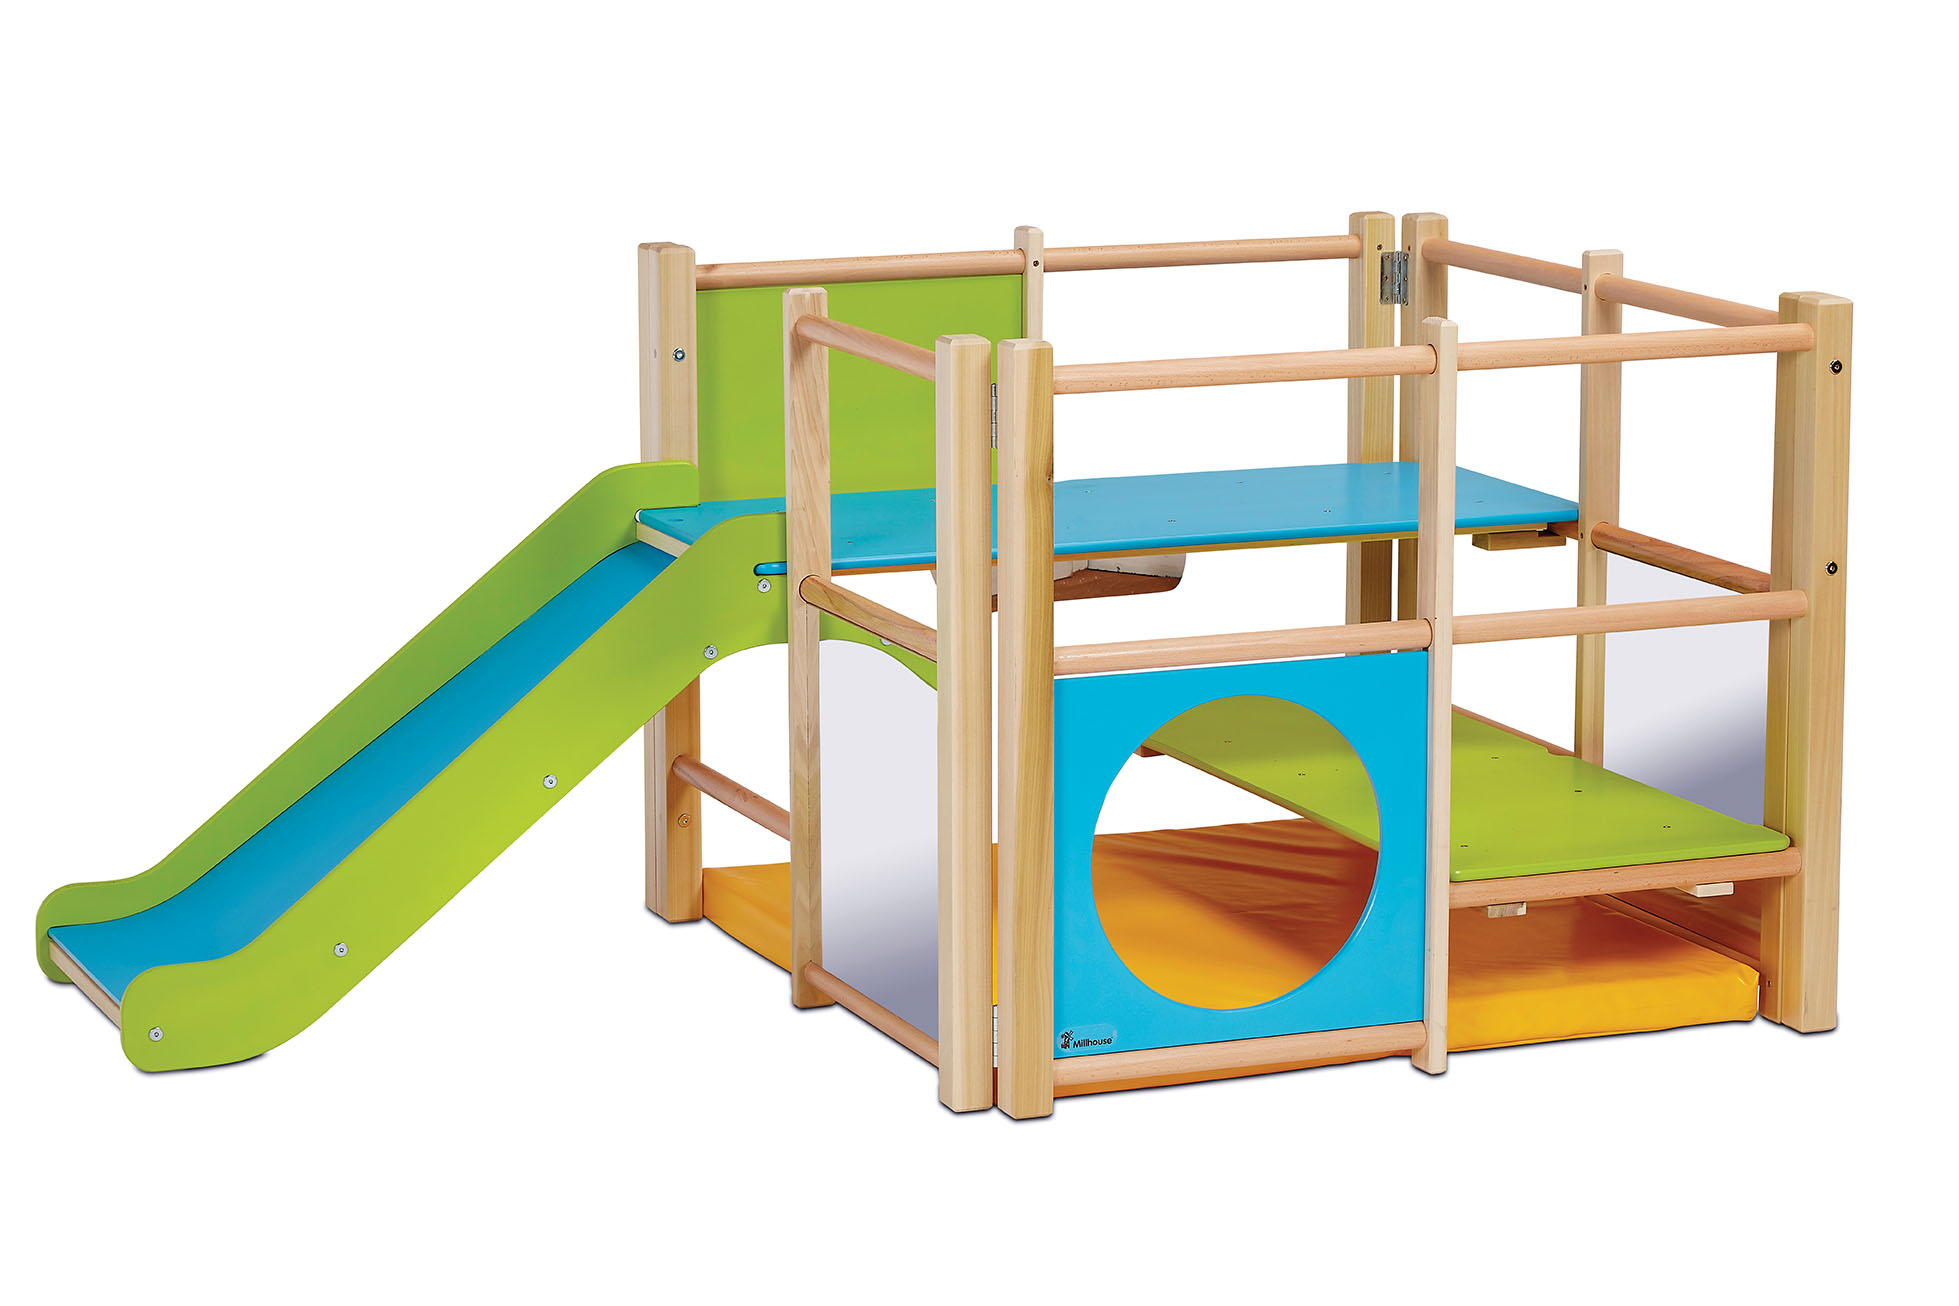 PT183-Millhouse-Early-Years-Furniture-Toddler-Activity-Unit_Main_RGB.jpg